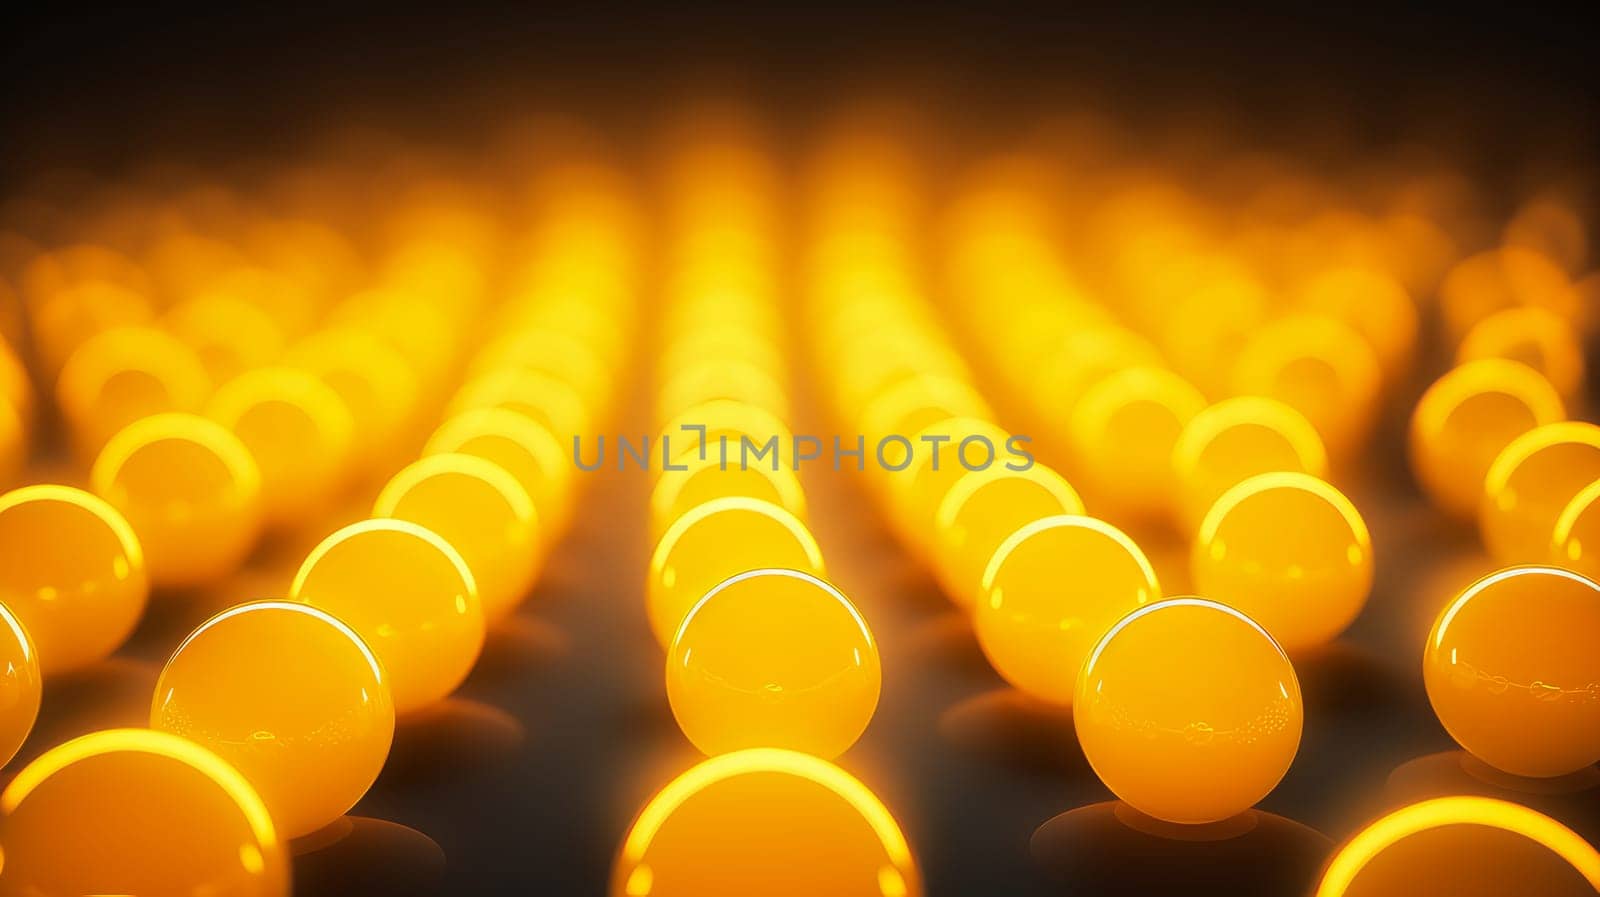 Beautiful luxury creative 3D modern abstract dark background consisting of yellow balls and spheres with light digital effect, copy space